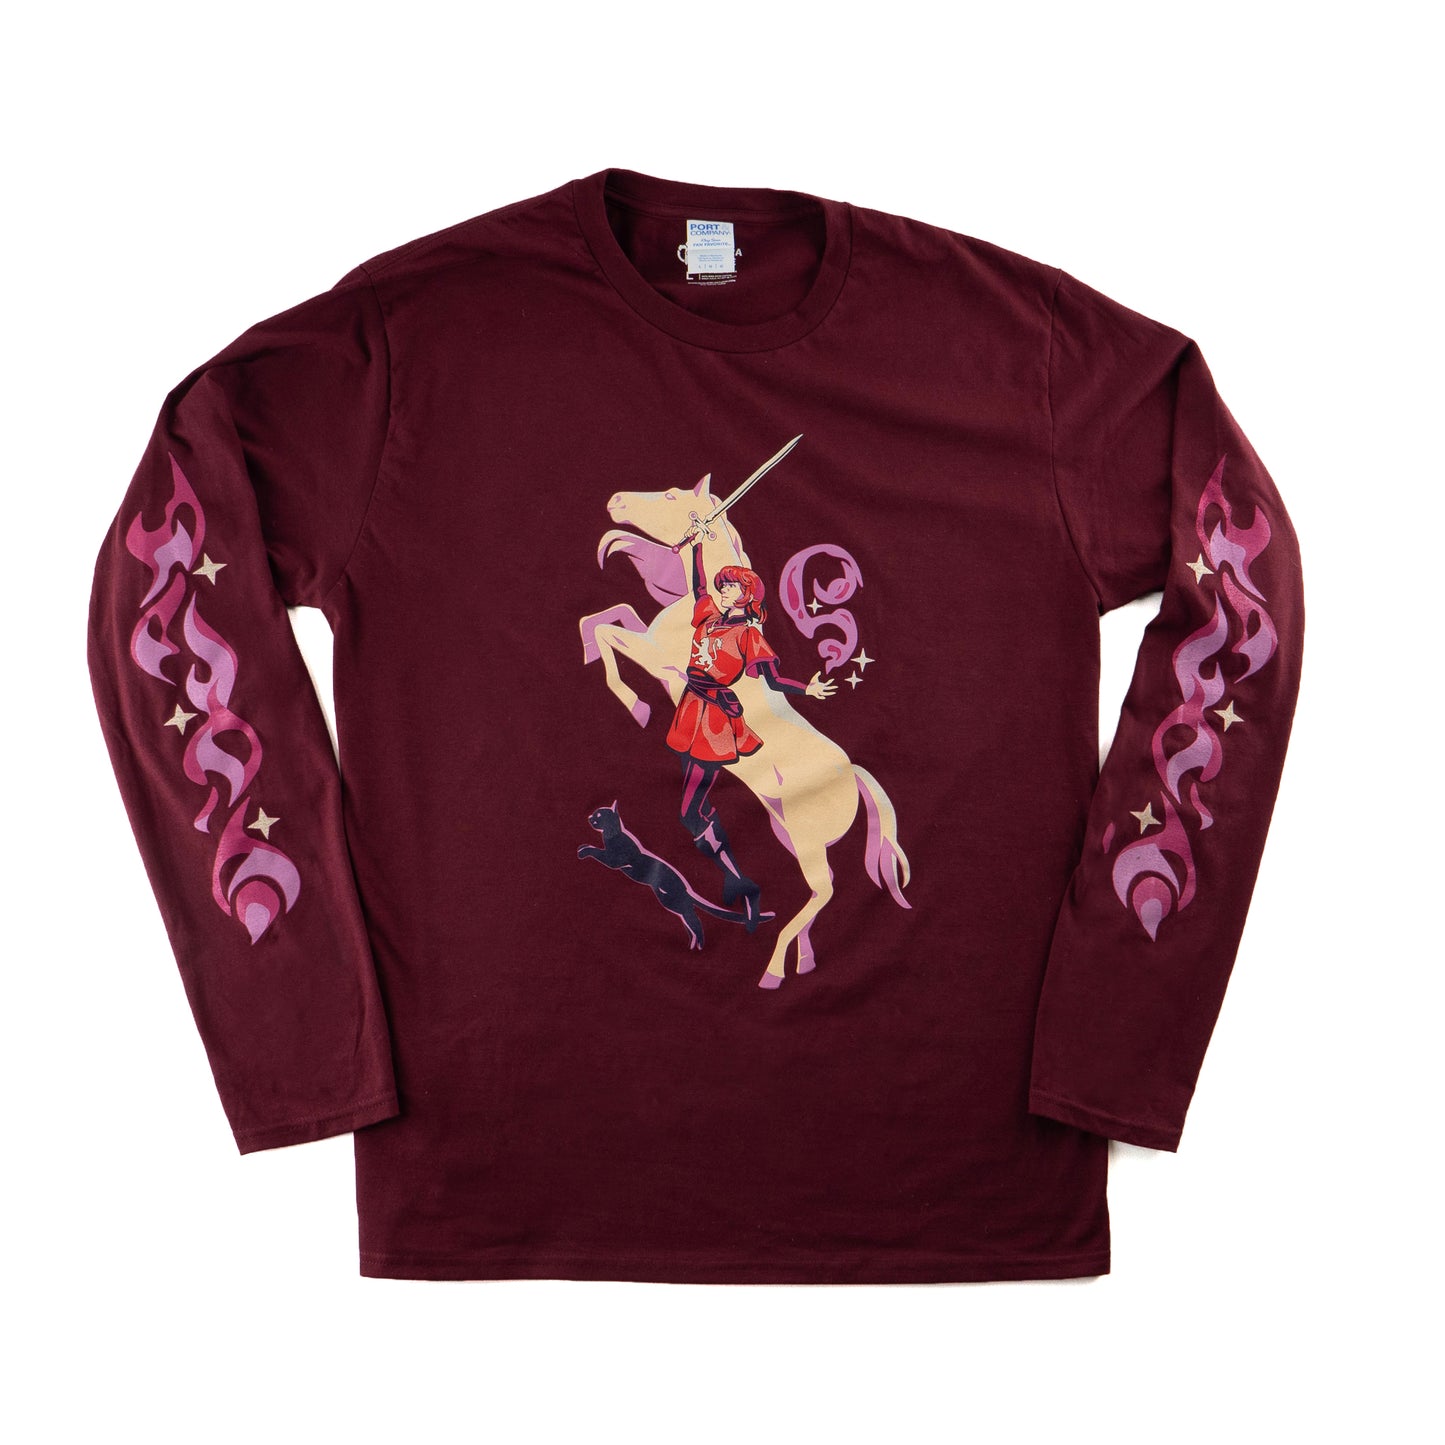 a maroon long-sleeved t-shirt on a white backdrop. the t-shirt has an illustration of a girl in red weilding a sword in her right hand and purple magic in her left. behind her is a light-colored horse and at her feet is a dark cat. they are all leaping dramatically. there are purple magic details on both sleeves.